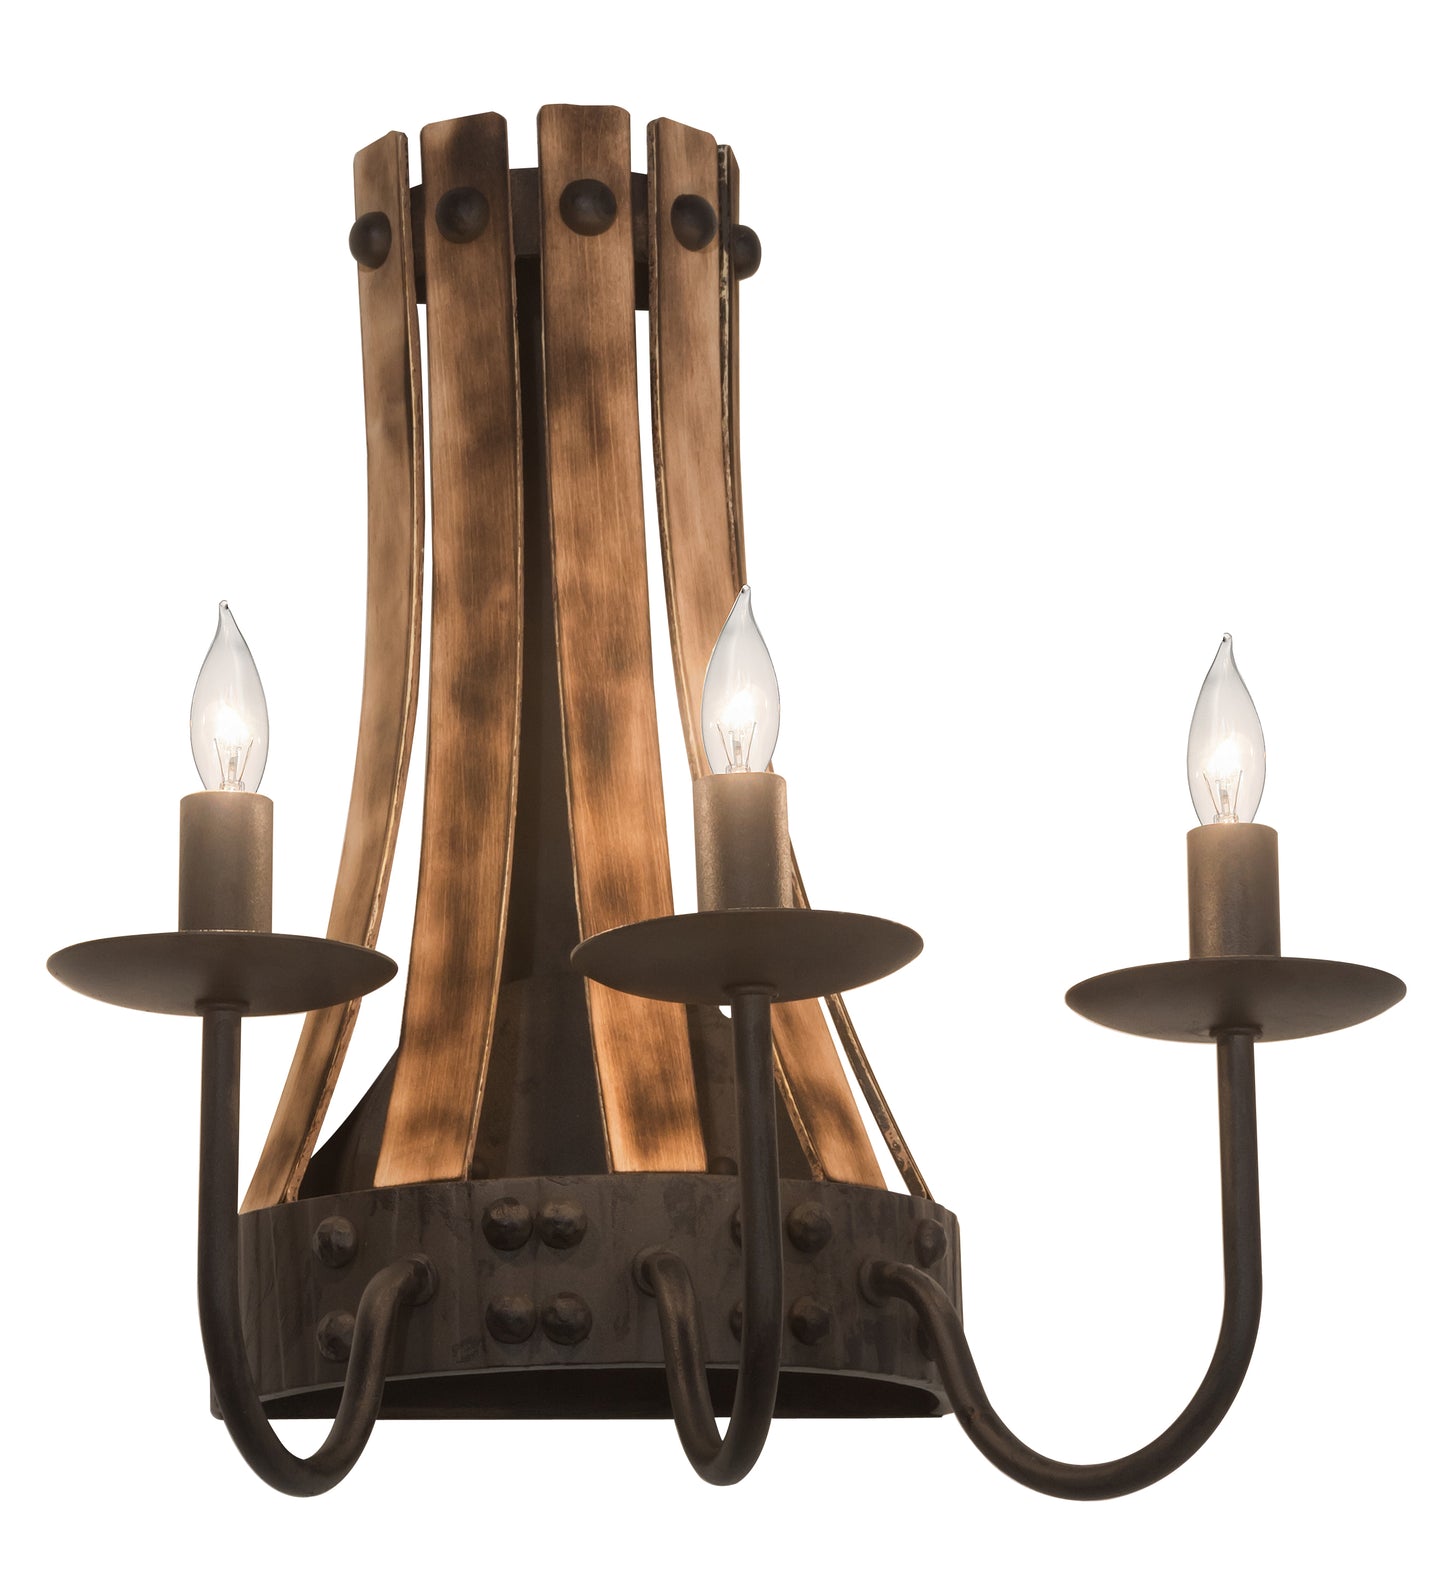 2nd Avenue 14" Barrel Stave Wall Sconce